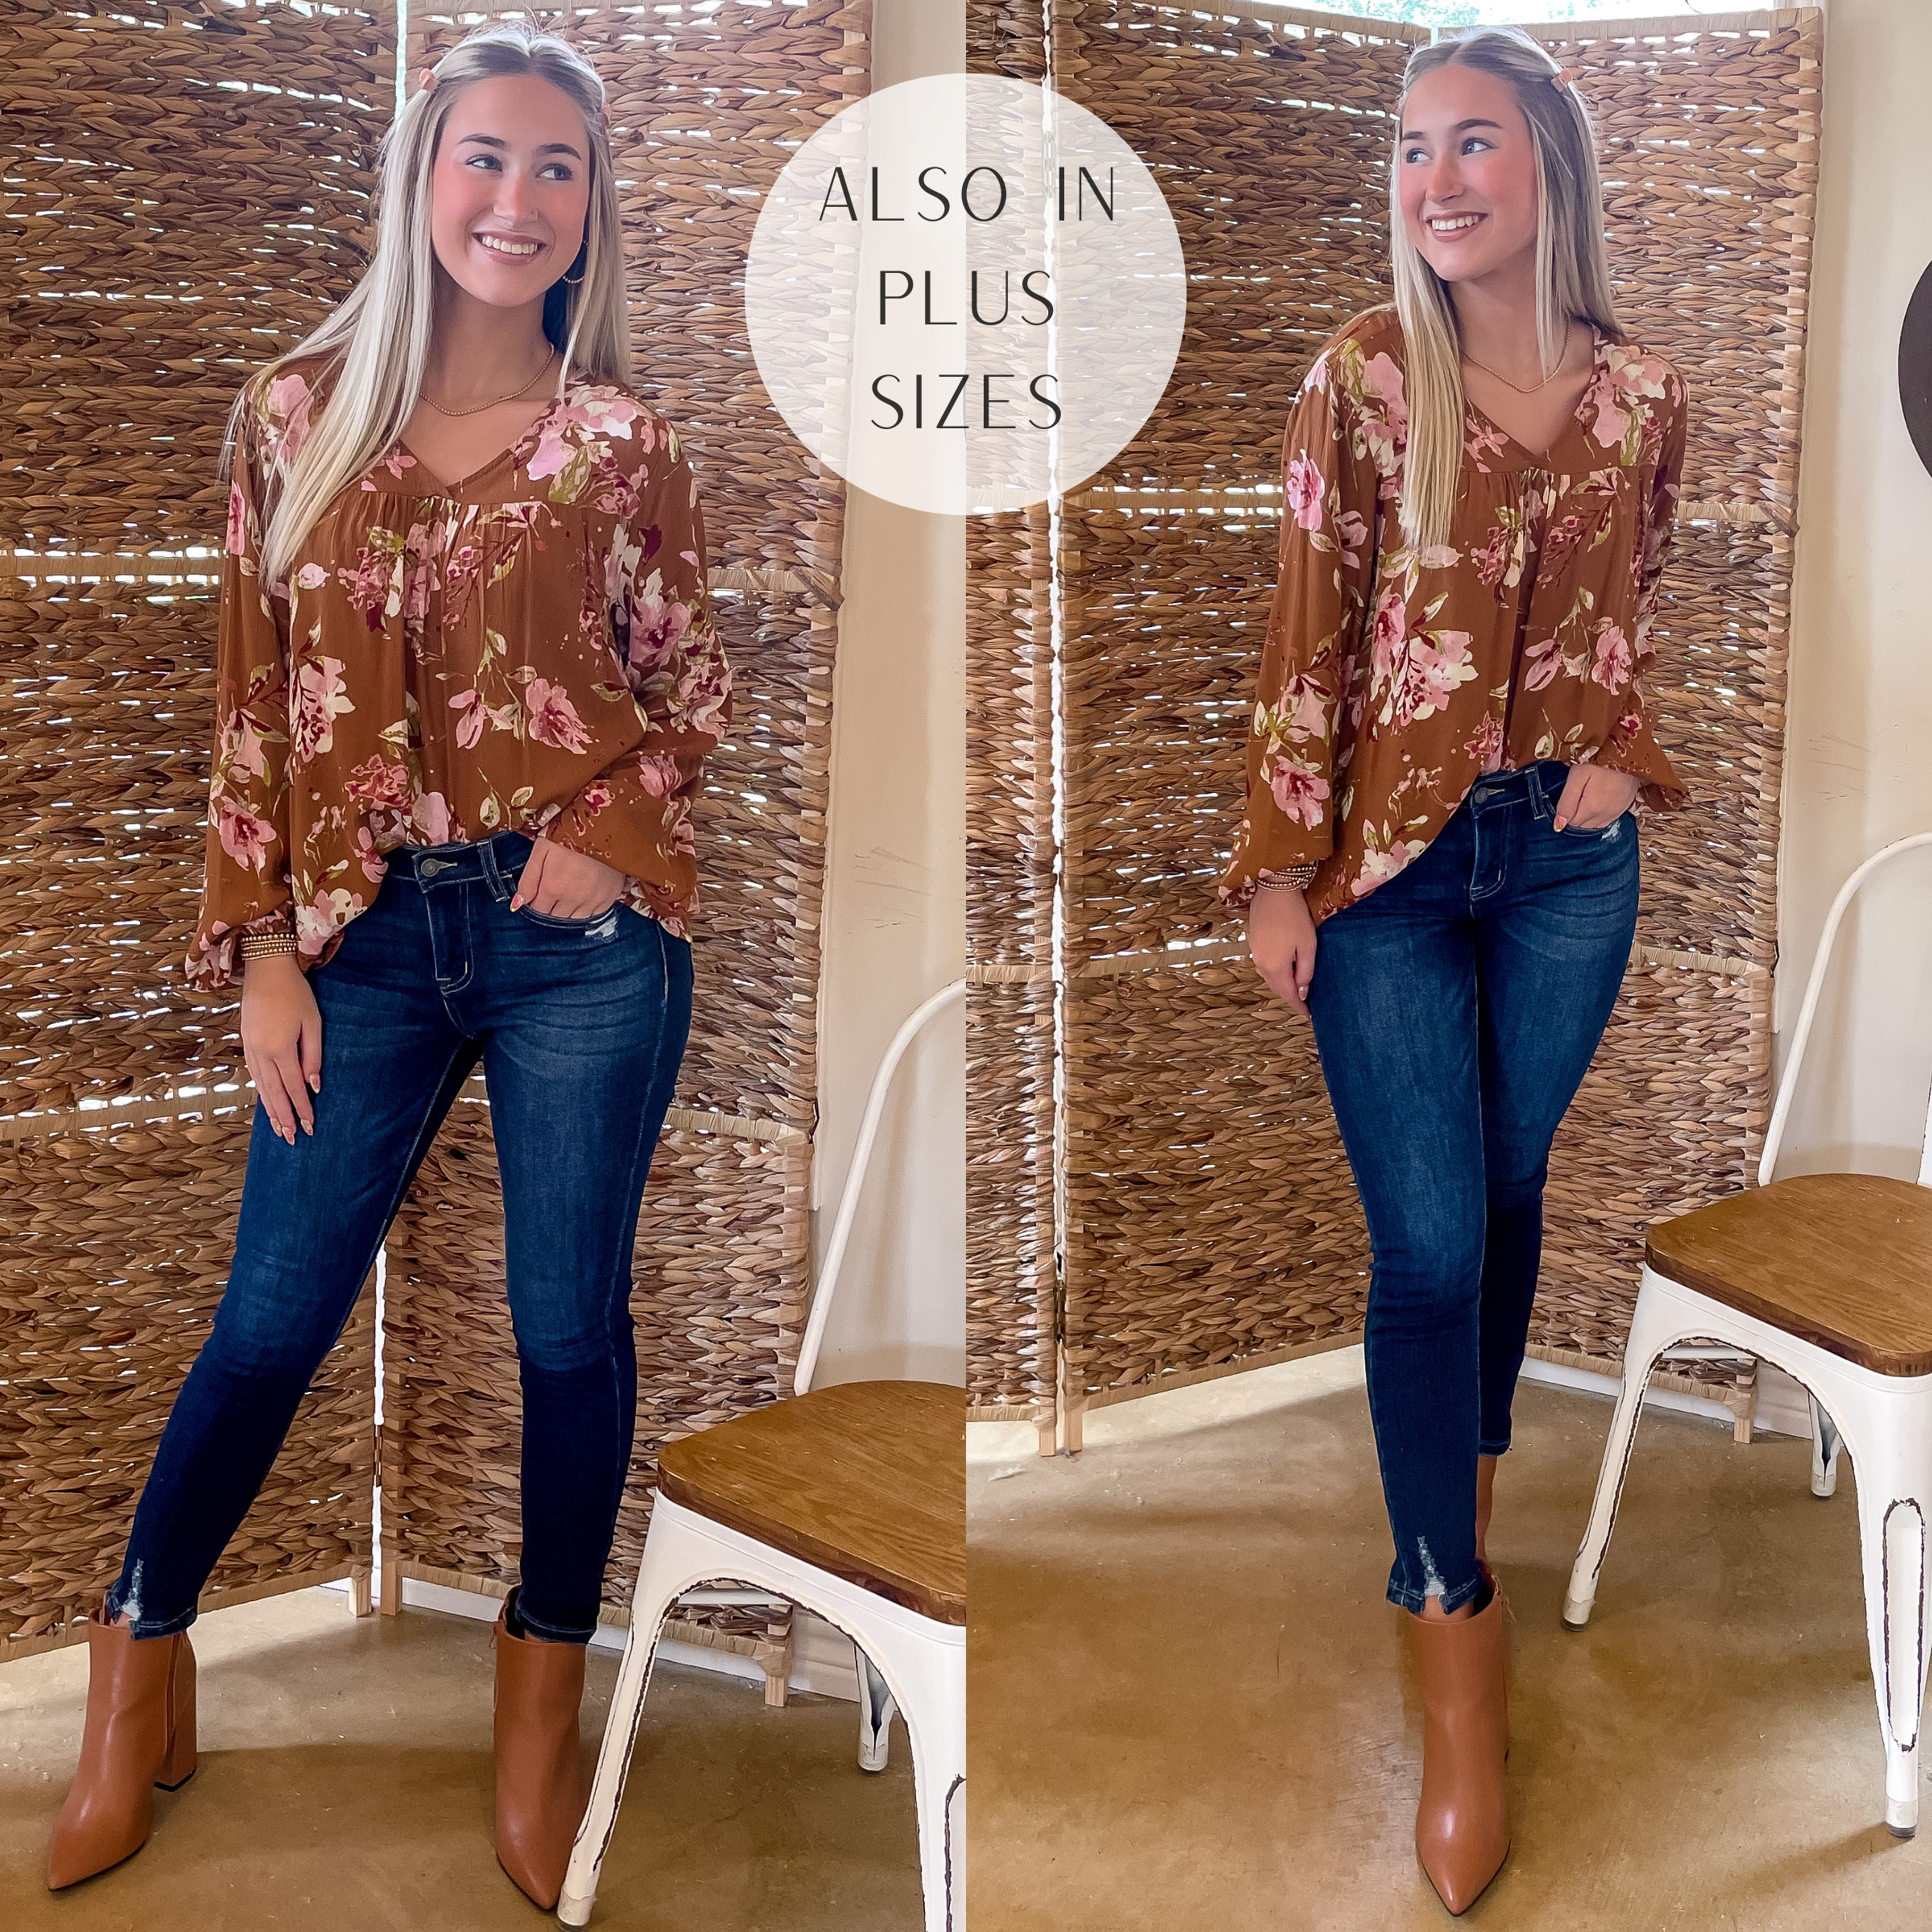 Model is wearing a camel brown top with long sleeves and a blush pink floral print. Model has it paired with dark wash skinny jeans, tan booties, and gold jewelry.